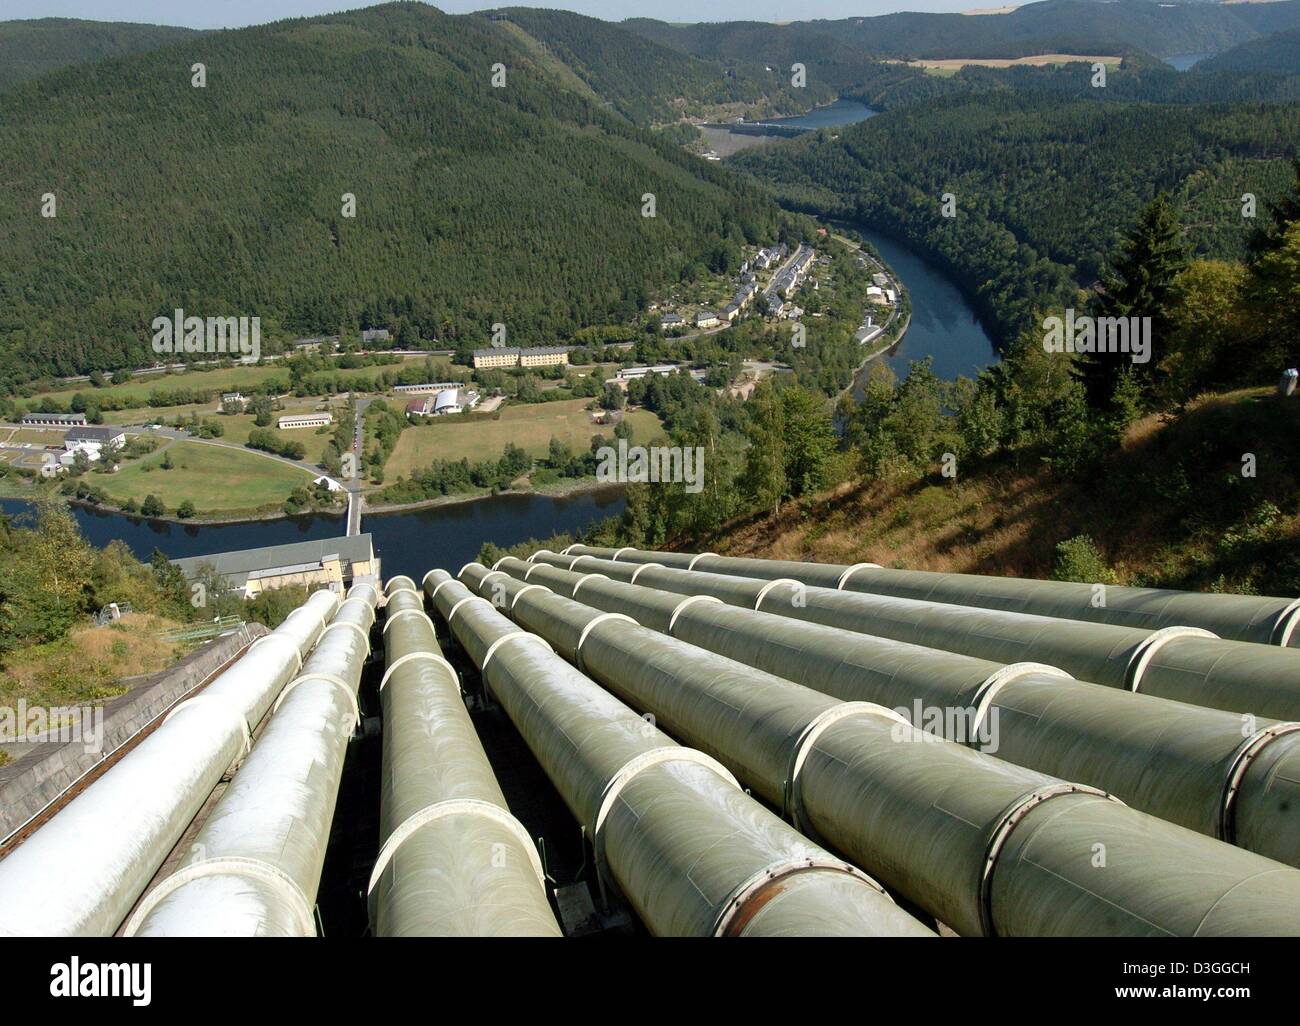 (dpa) - A view of the 672 m long water pipe of the pump storage hydrostation Hohenwarte II into the Saale River valley, in eastern Germany, 10 August 2004. The hydrostation, which is today run by Vattenfall Europe, was built in 1966. Stock Photo